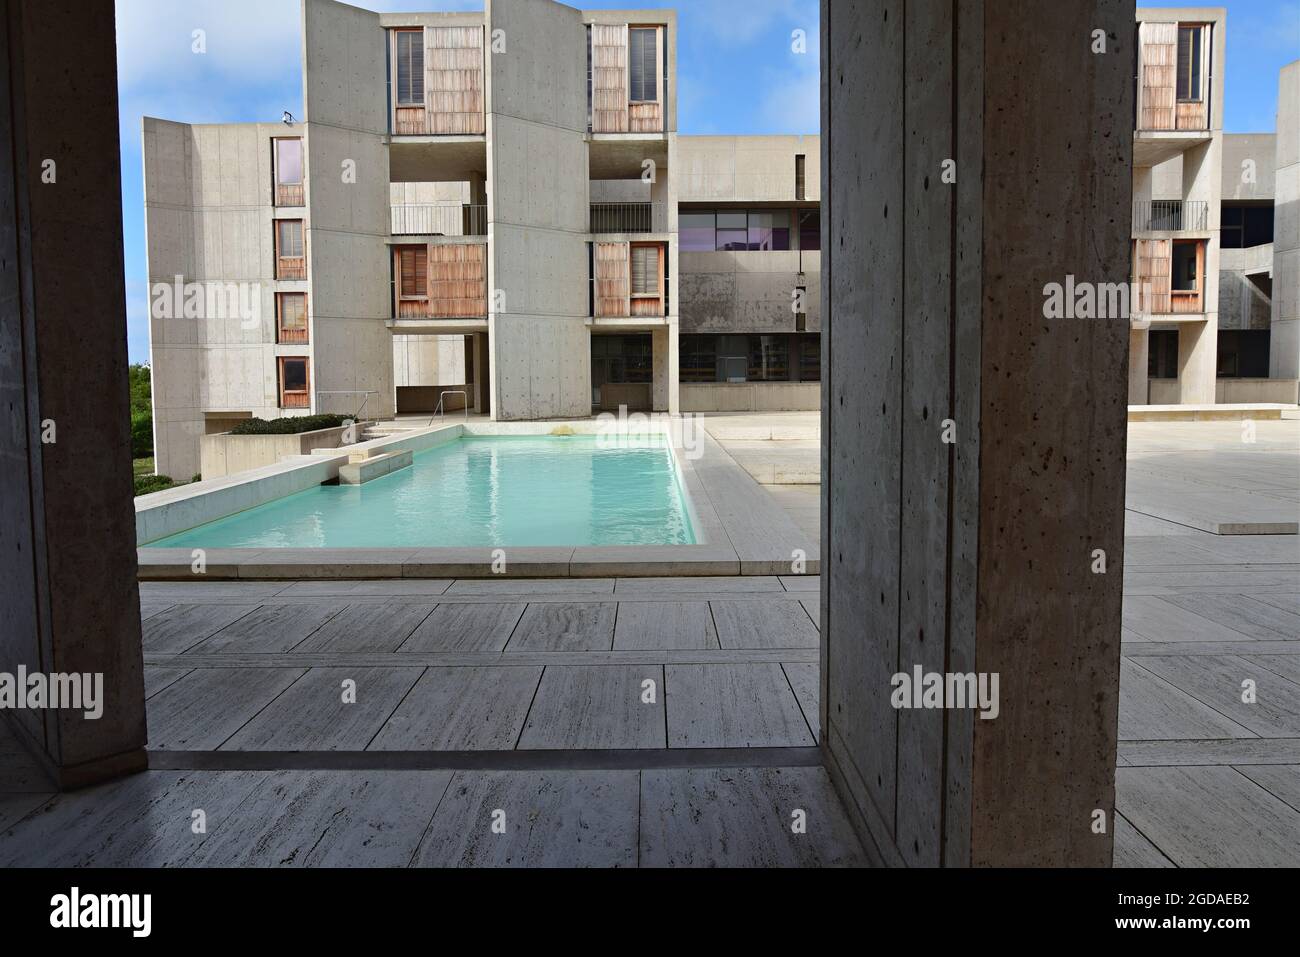 Landscape with scenic pool view of symmetric building masses at Salk Institute for Biological Studies in La Jolla San Diego California Stock Photo